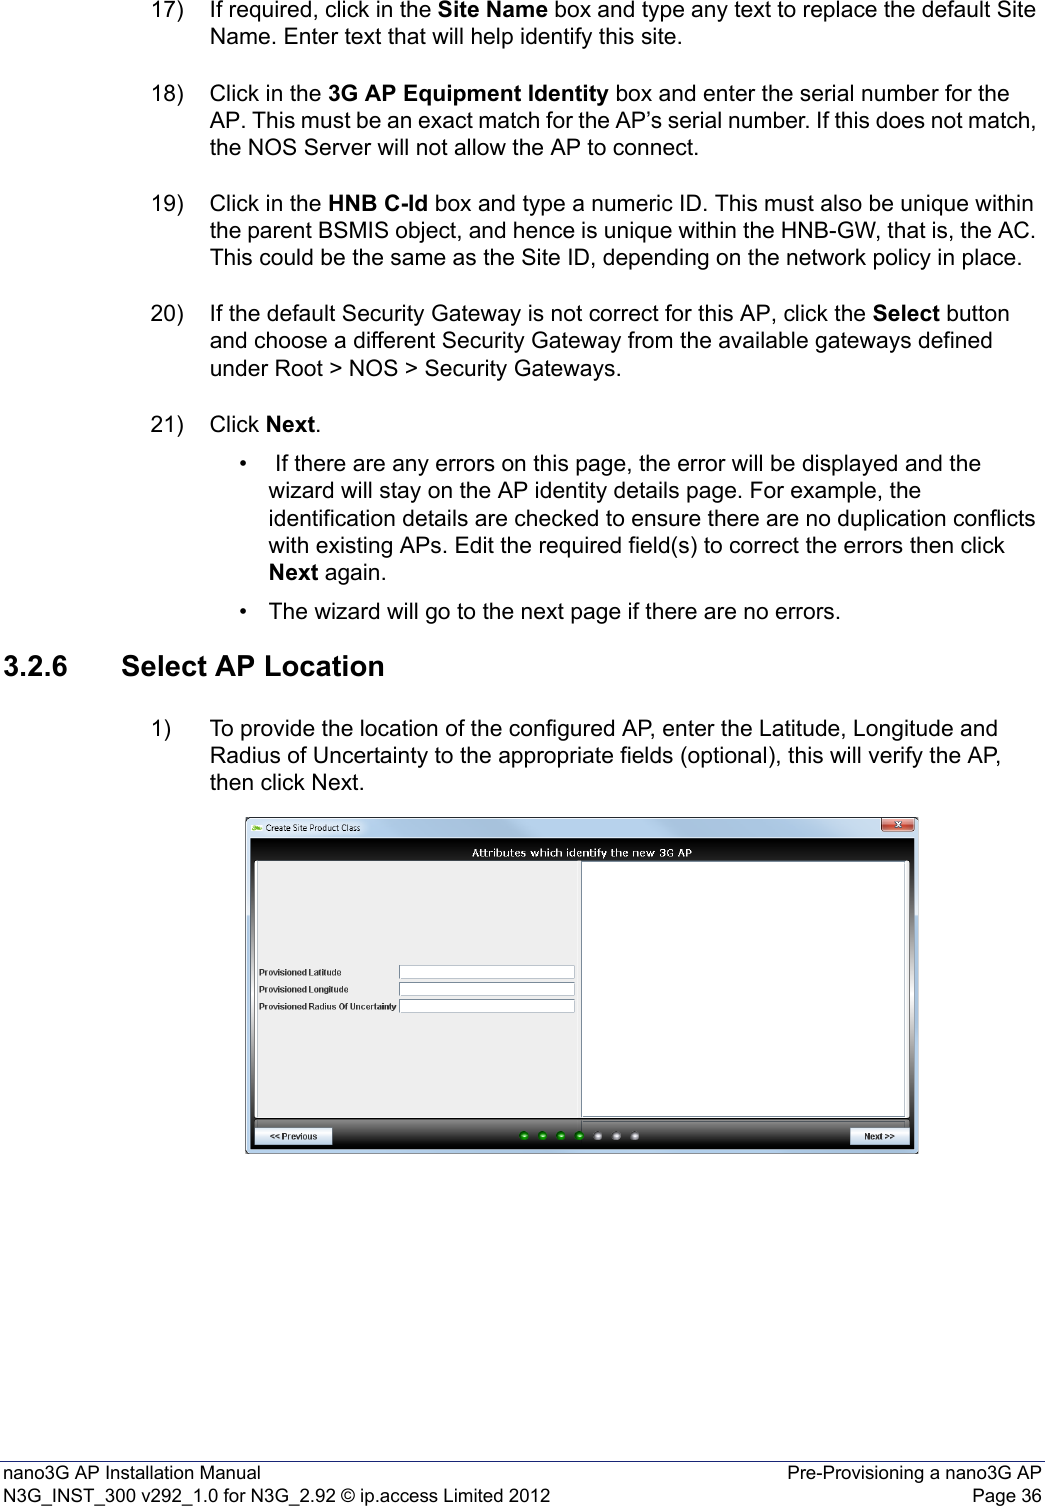 nano3G AP Installation Manual Pre-Provisioning a nano3G APN3G_INST_300 v292_1.0 for N3G_2.92 © ip.access Limited 2012 Page 3617) If required, click in the Site Name box and type any text to replace the default Site Name. Enter text that will help identify this site. 18) Click in the 3G AP Equipment Identity box and enter the serial number for the AP. This must be an exact match for the AP’s serial number. If this does not match, the NOS Server will not allow the AP to connect. 19) Click in the HNB C-Id box and type a numeric ID. This must also be unique within the parent BSMIS object, and hence is unique within the HNB-GW, that is, the AC. This could be the same as the Site ID, depending on the network policy in place. 20) If the default Security Gateway is not correct for this AP, click the Select button and choose a different Security Gateway from the available gateways defined under Root &gt; NOS &gt; Security Gateways.21) Click Next.•  If there are any errors on this page, the error will be displayed and the wizard will stay on the AP identity details page. For example, the identification details are checked to ensure there are no duplication conflicts with existing APs. Edit the required field(s) to correct the errors then click Next again. • The wizard will go to the next page if there are no errors.3.2.6 Select AP Location1) To provide the location of the configured AP, enter the Latitude, Longitude and Radius of Uncertainty to the appropriate fields (optional), this will verify the AP, then click Next.